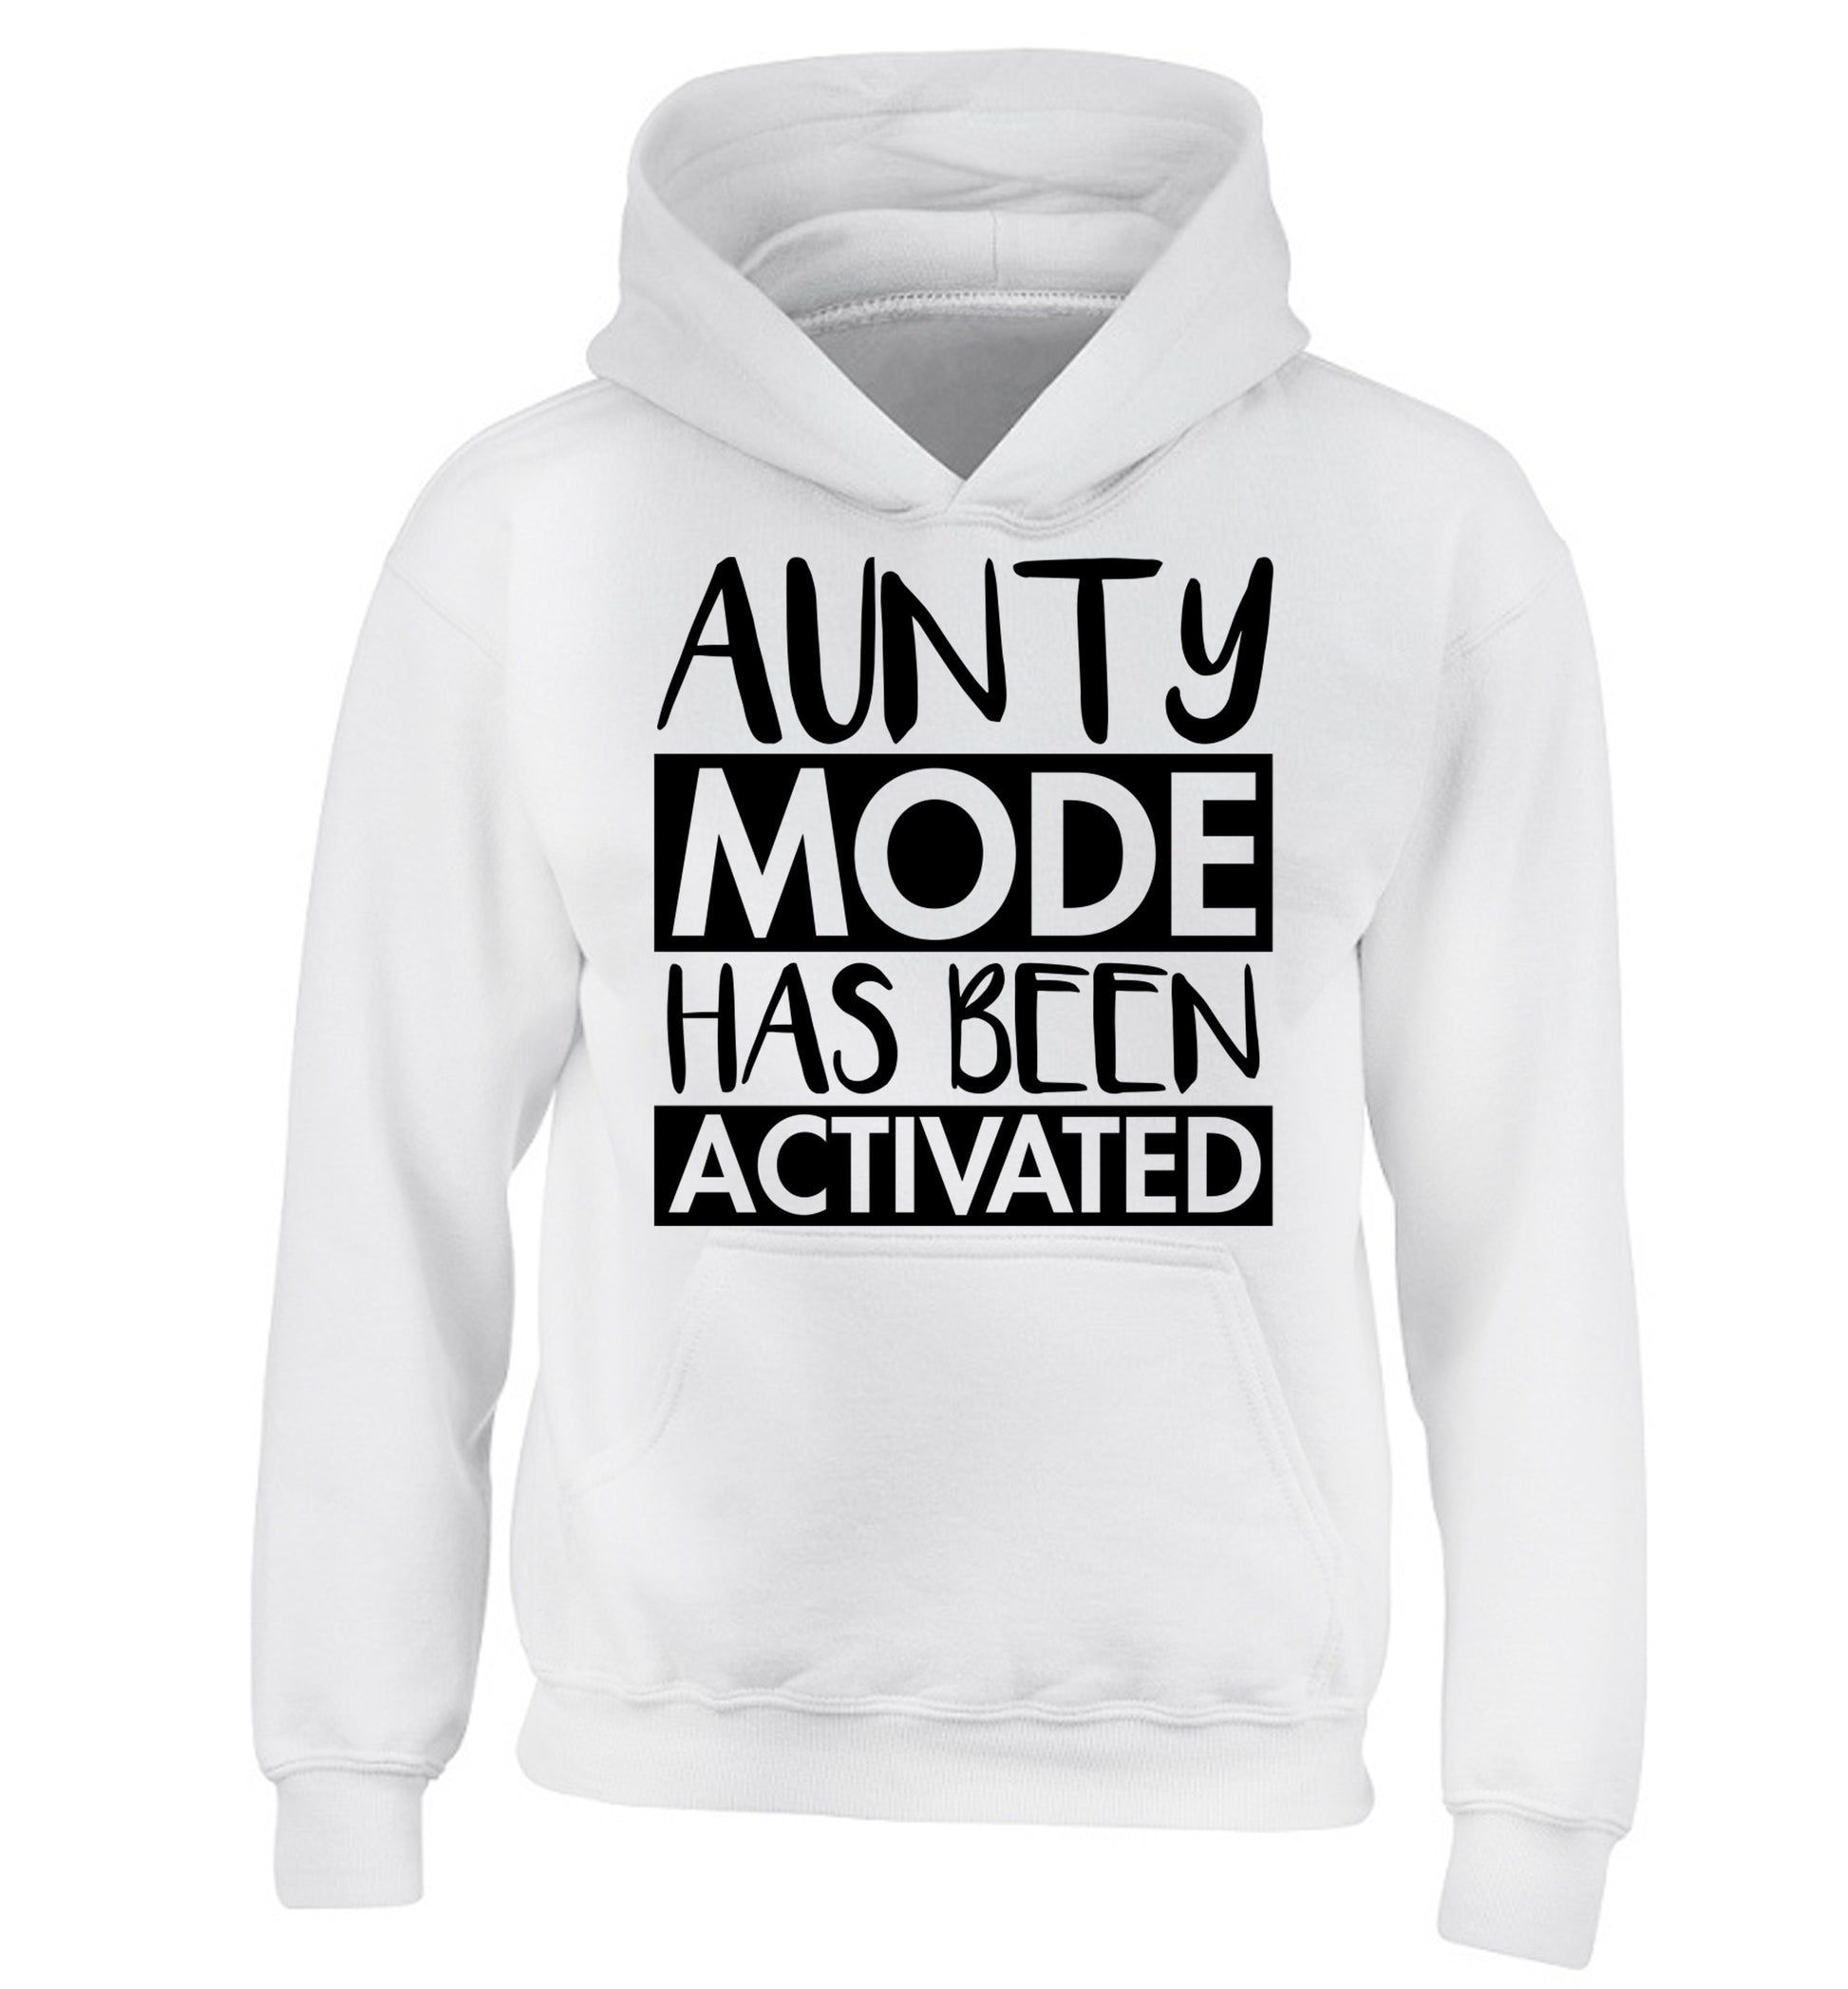 Aunty mode activated children's white hoodie 12-14 Years